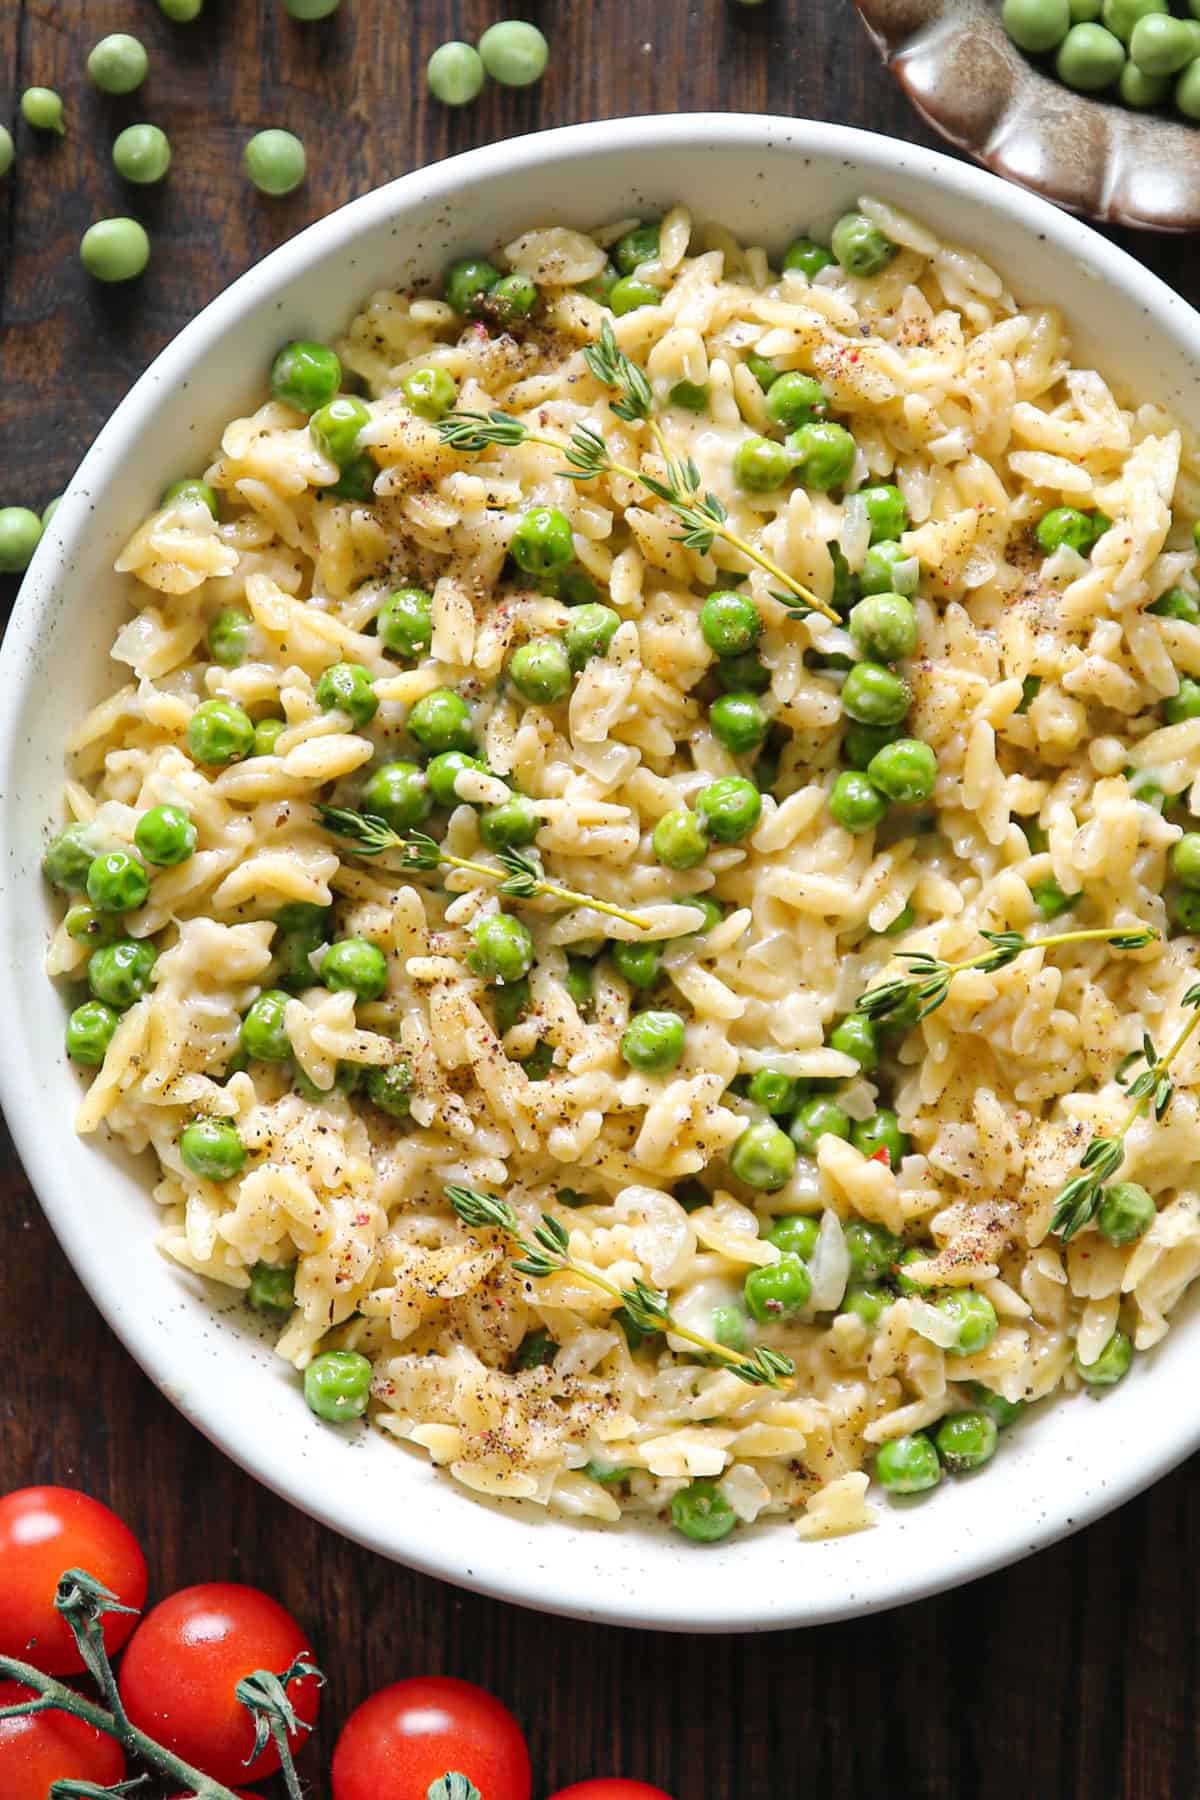 Creamy Garlic Parmesan Orzo with Green Peas - in a white bowl.